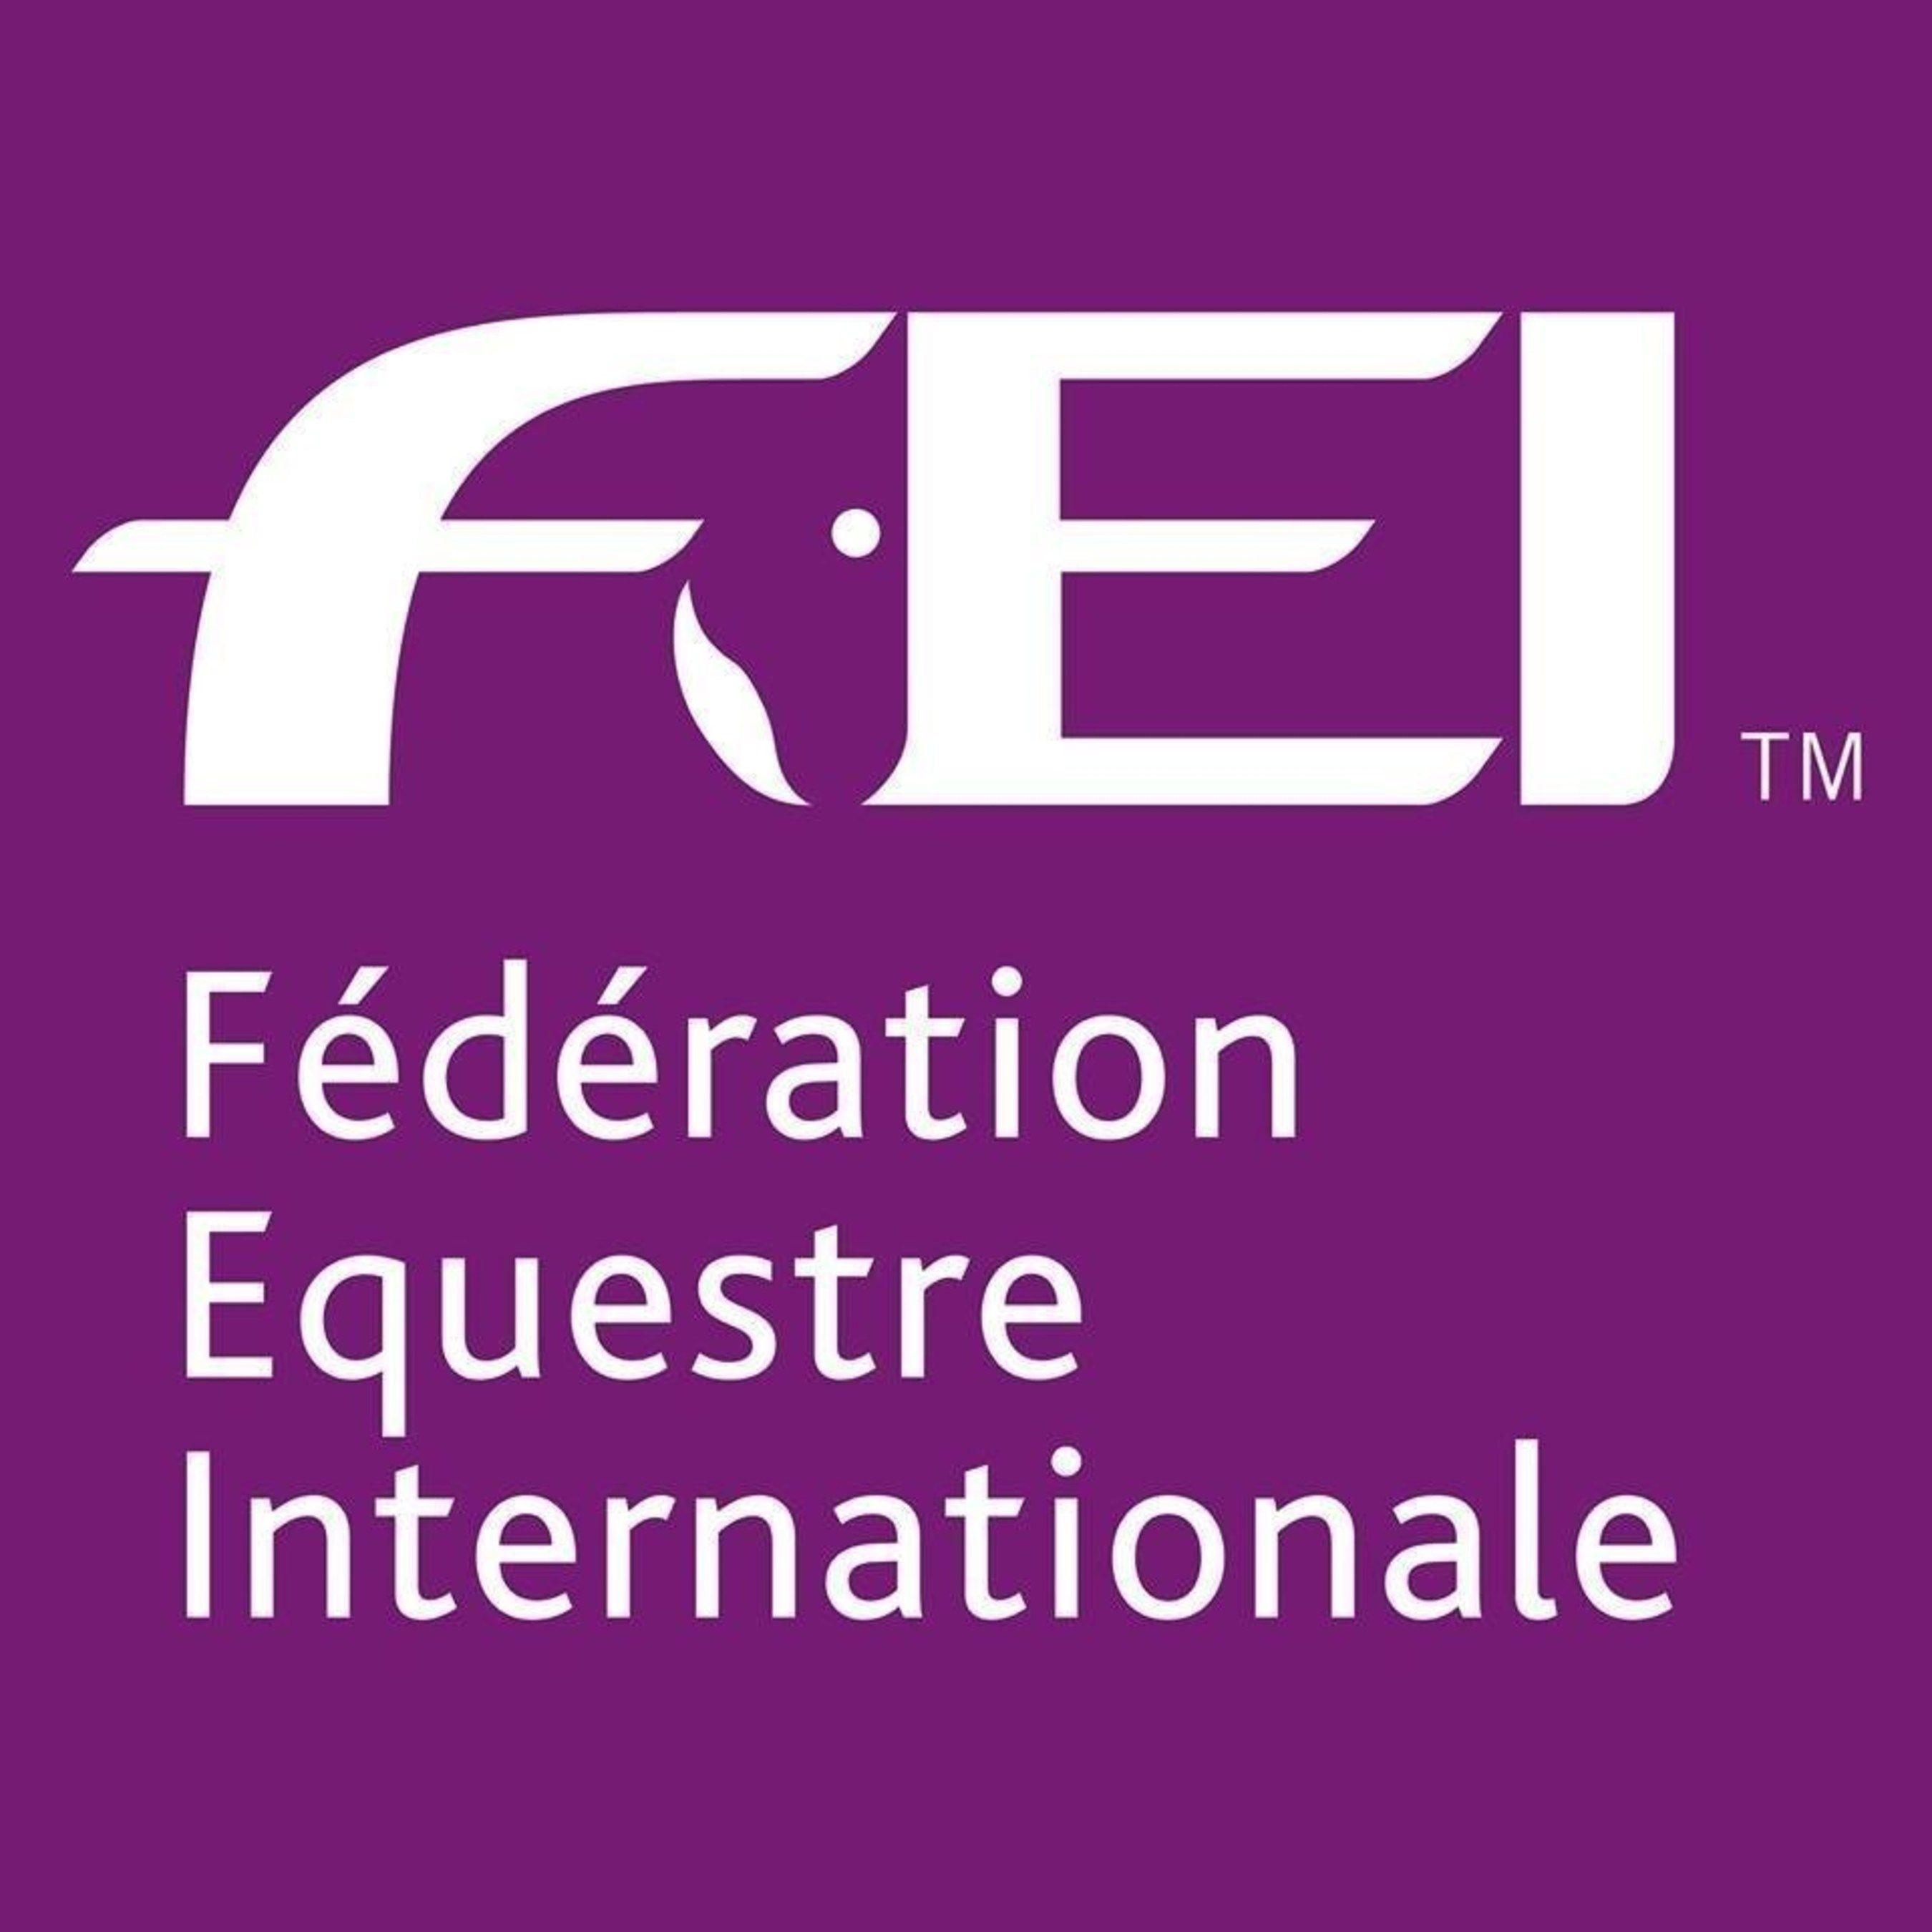 Fei Logo - Olympic equestrian #TwoHearts campaign captures hearts around the world